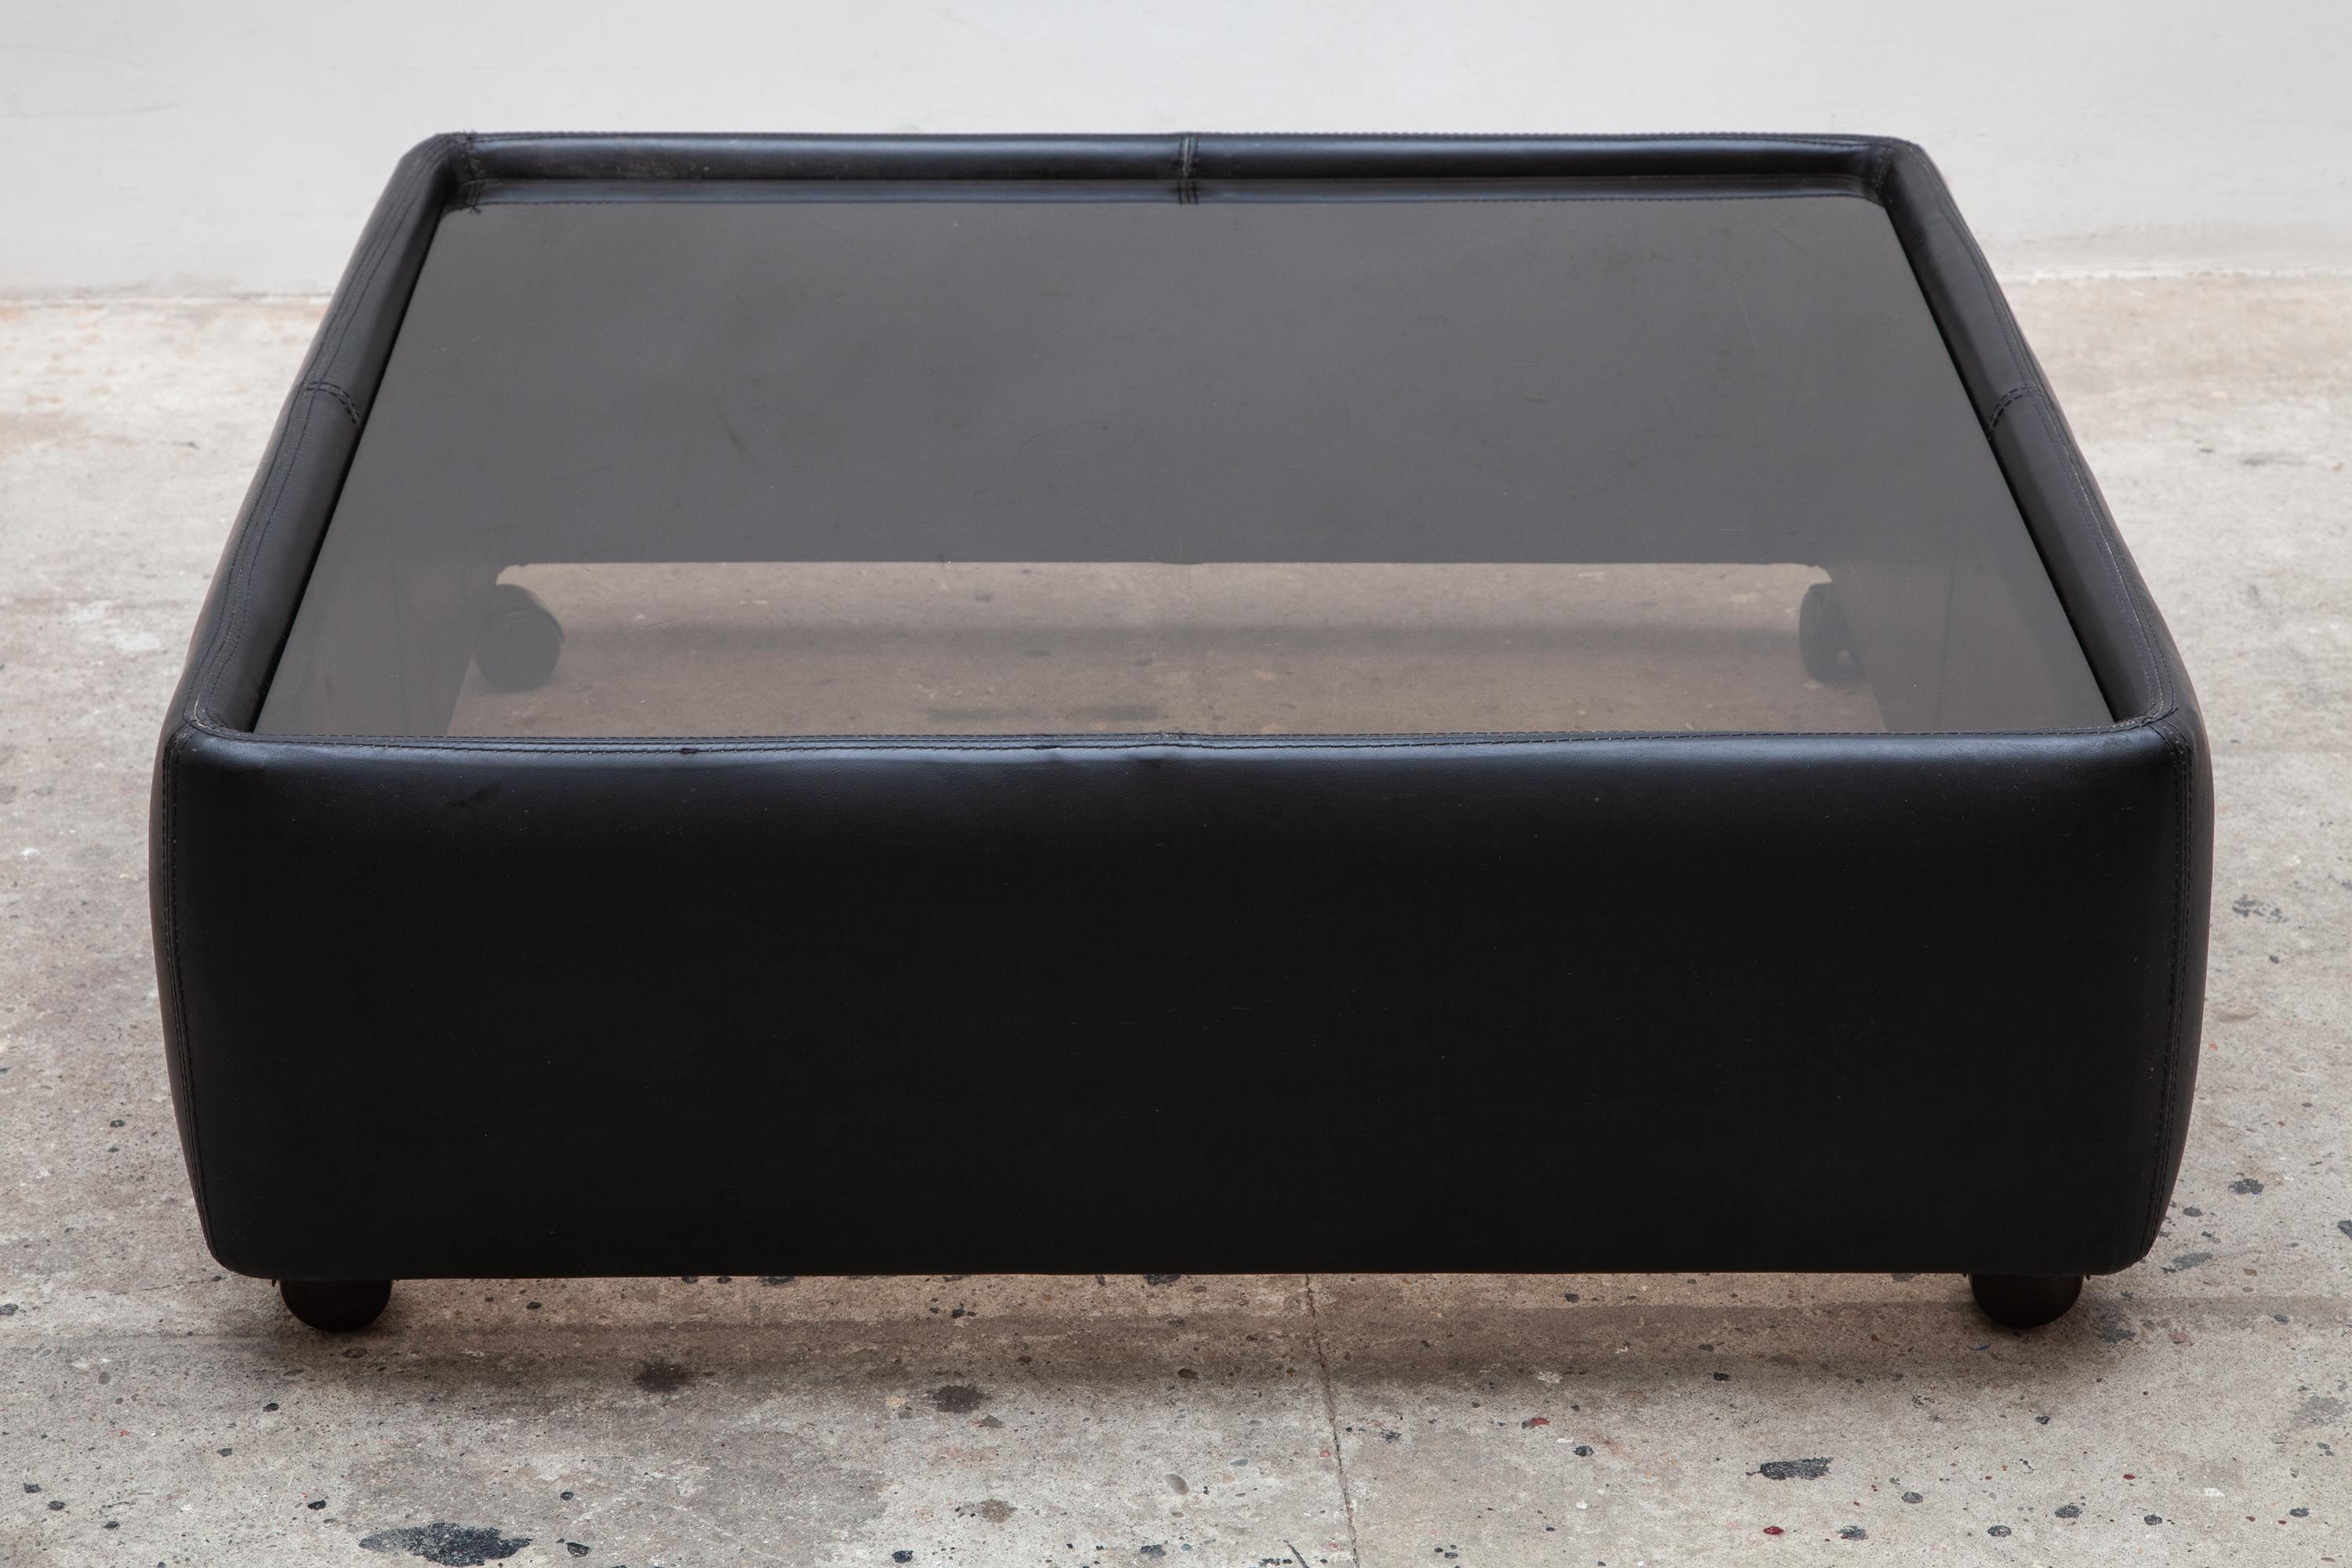 Minimalist 1970s entire piece is upholstered in black leather with a smoked glass top coffee or cocktail table by De Sede, Switzerland. Rests on four brown plastic casters.